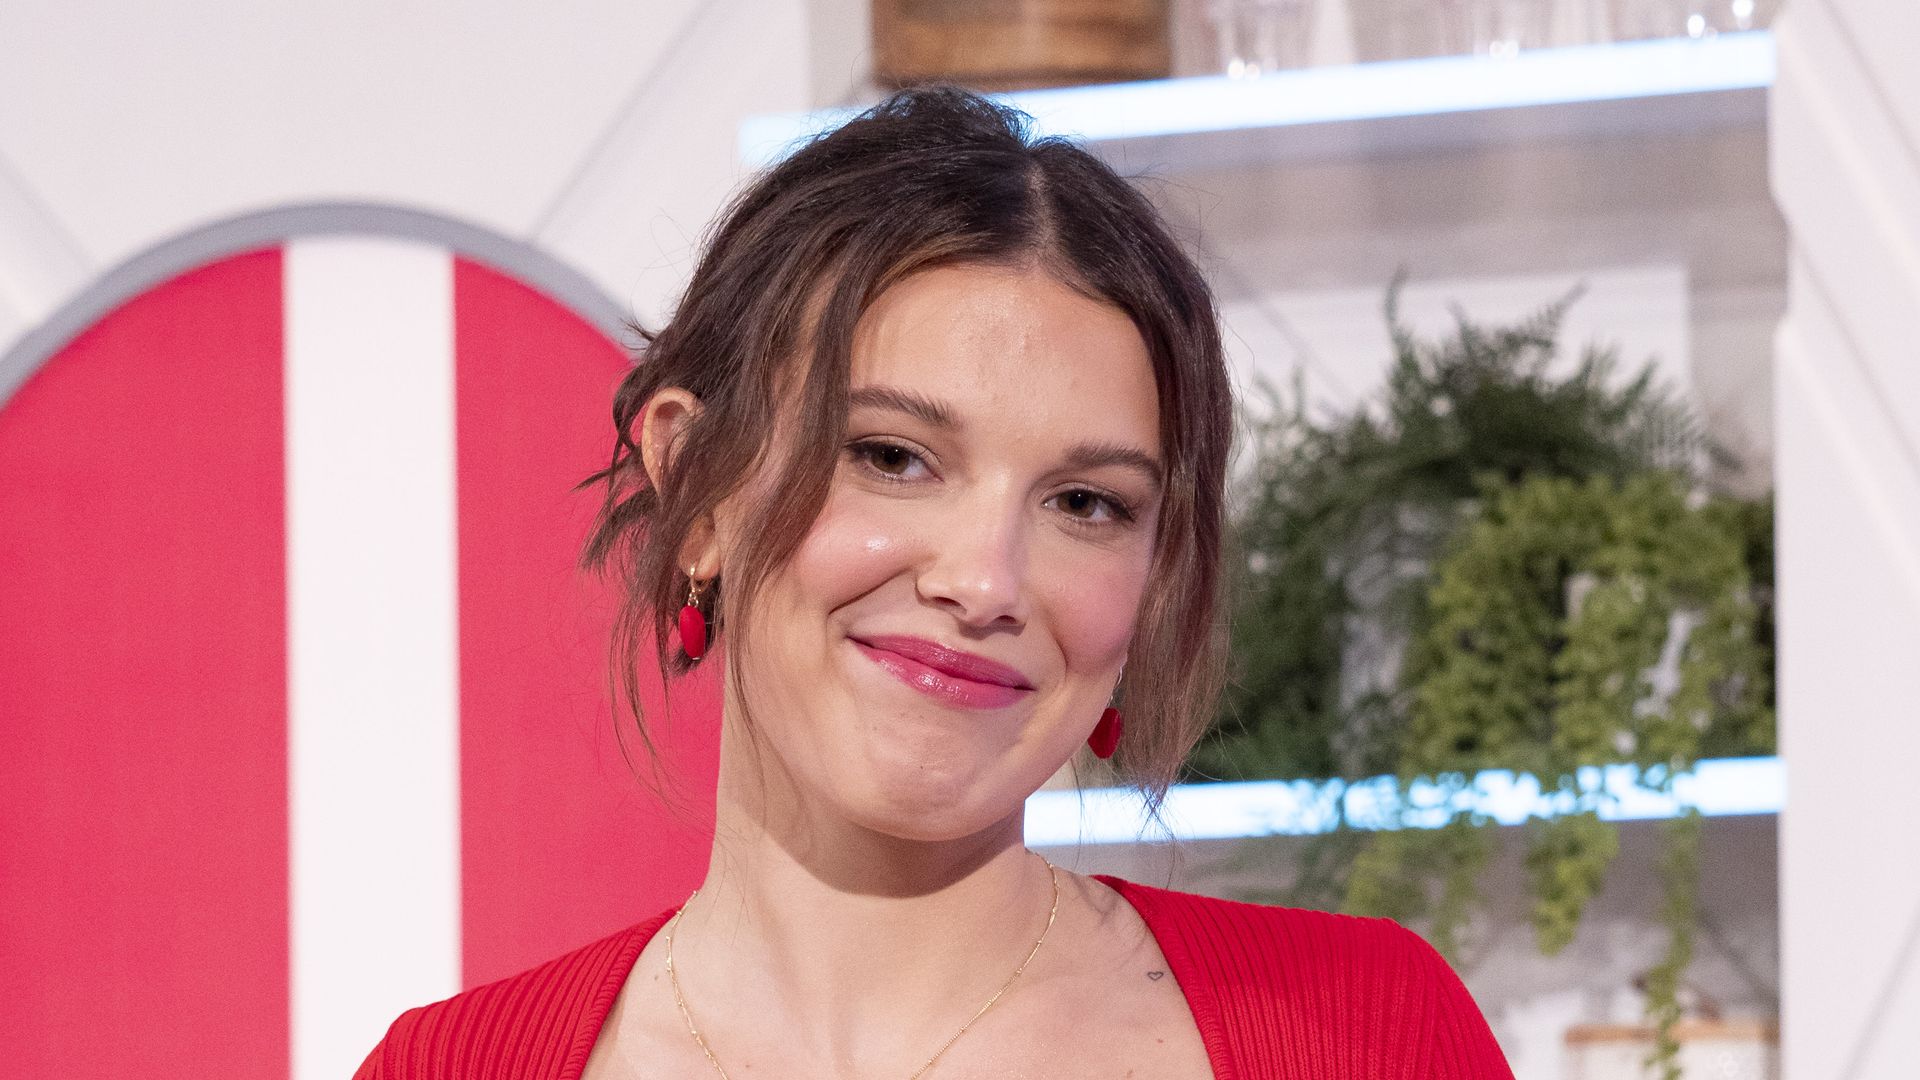 Millie Bobby Brown in a red dress on TV